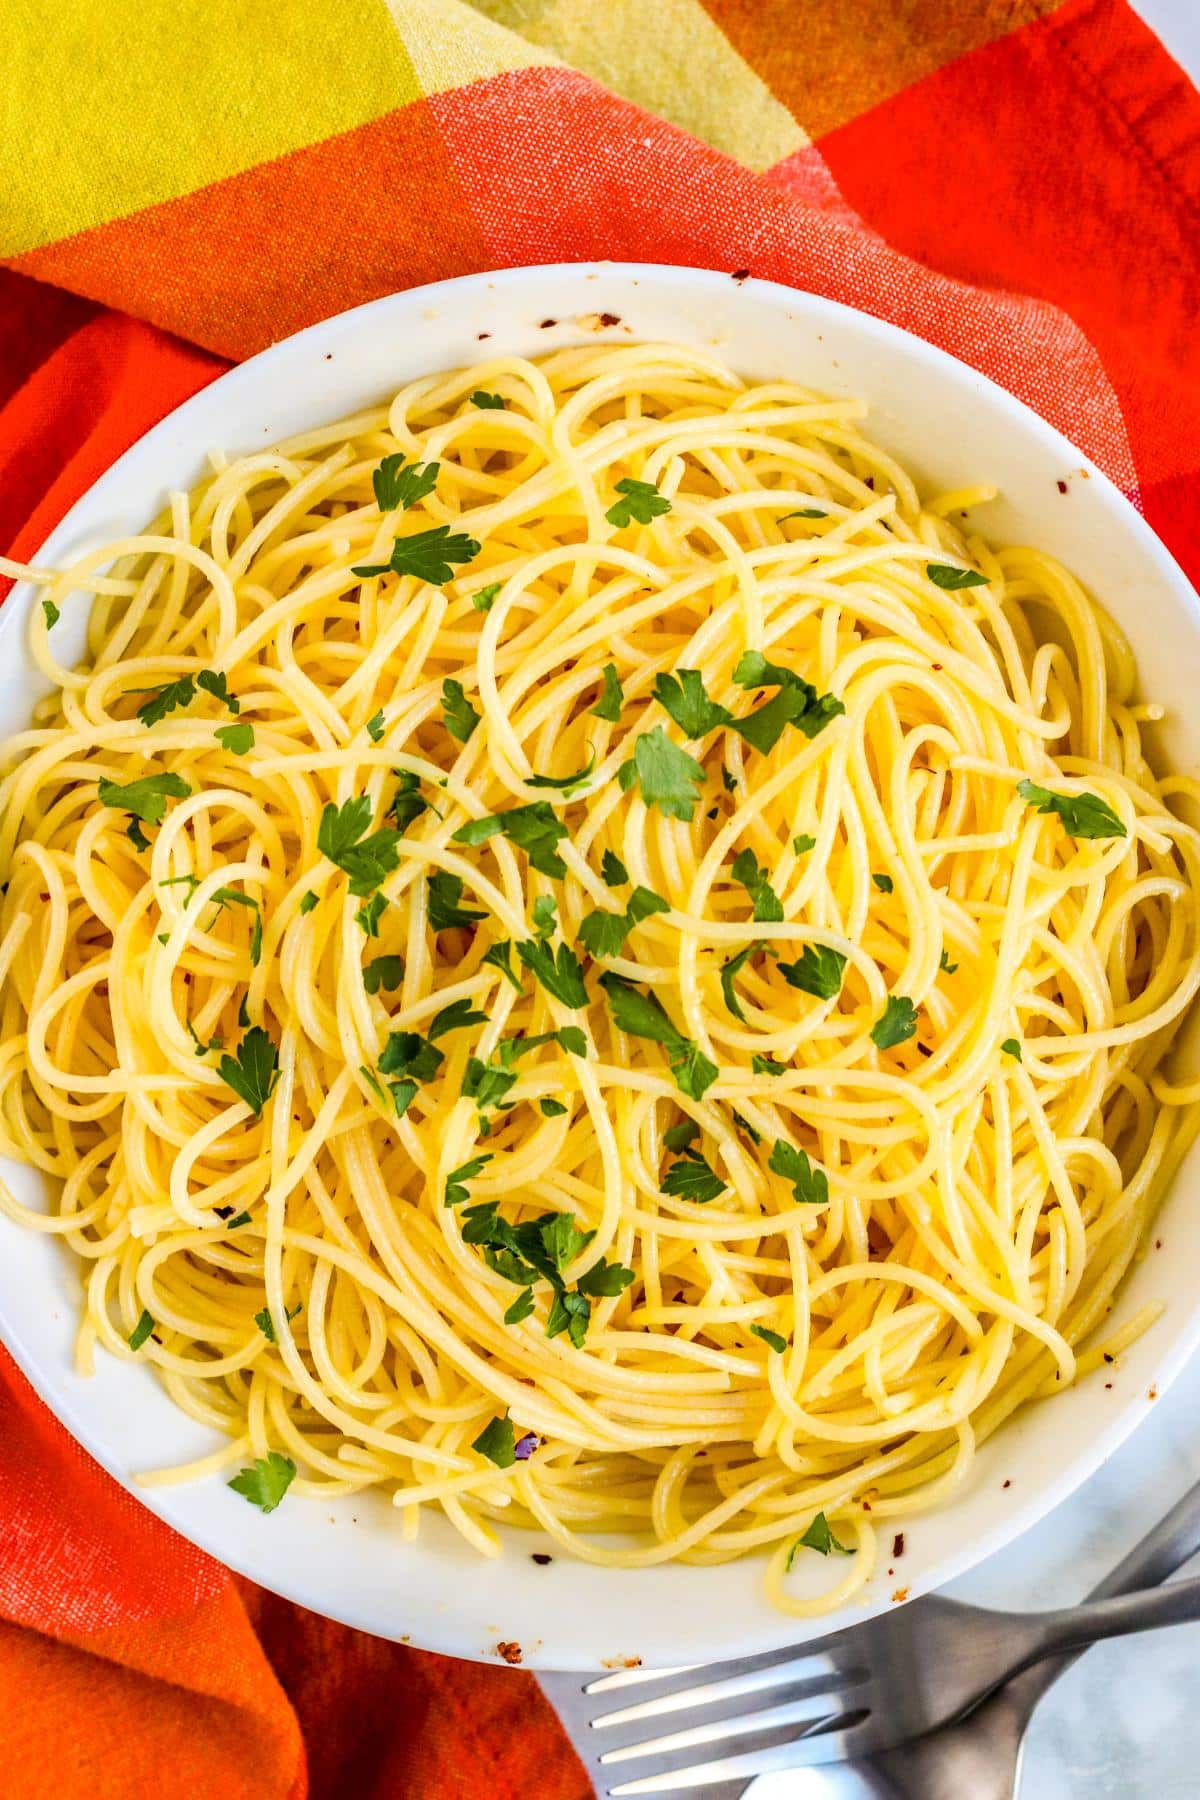 Bowl of Spaghetti with olive oil, garlic, crushed red pepper flakes, and fresh parsley.